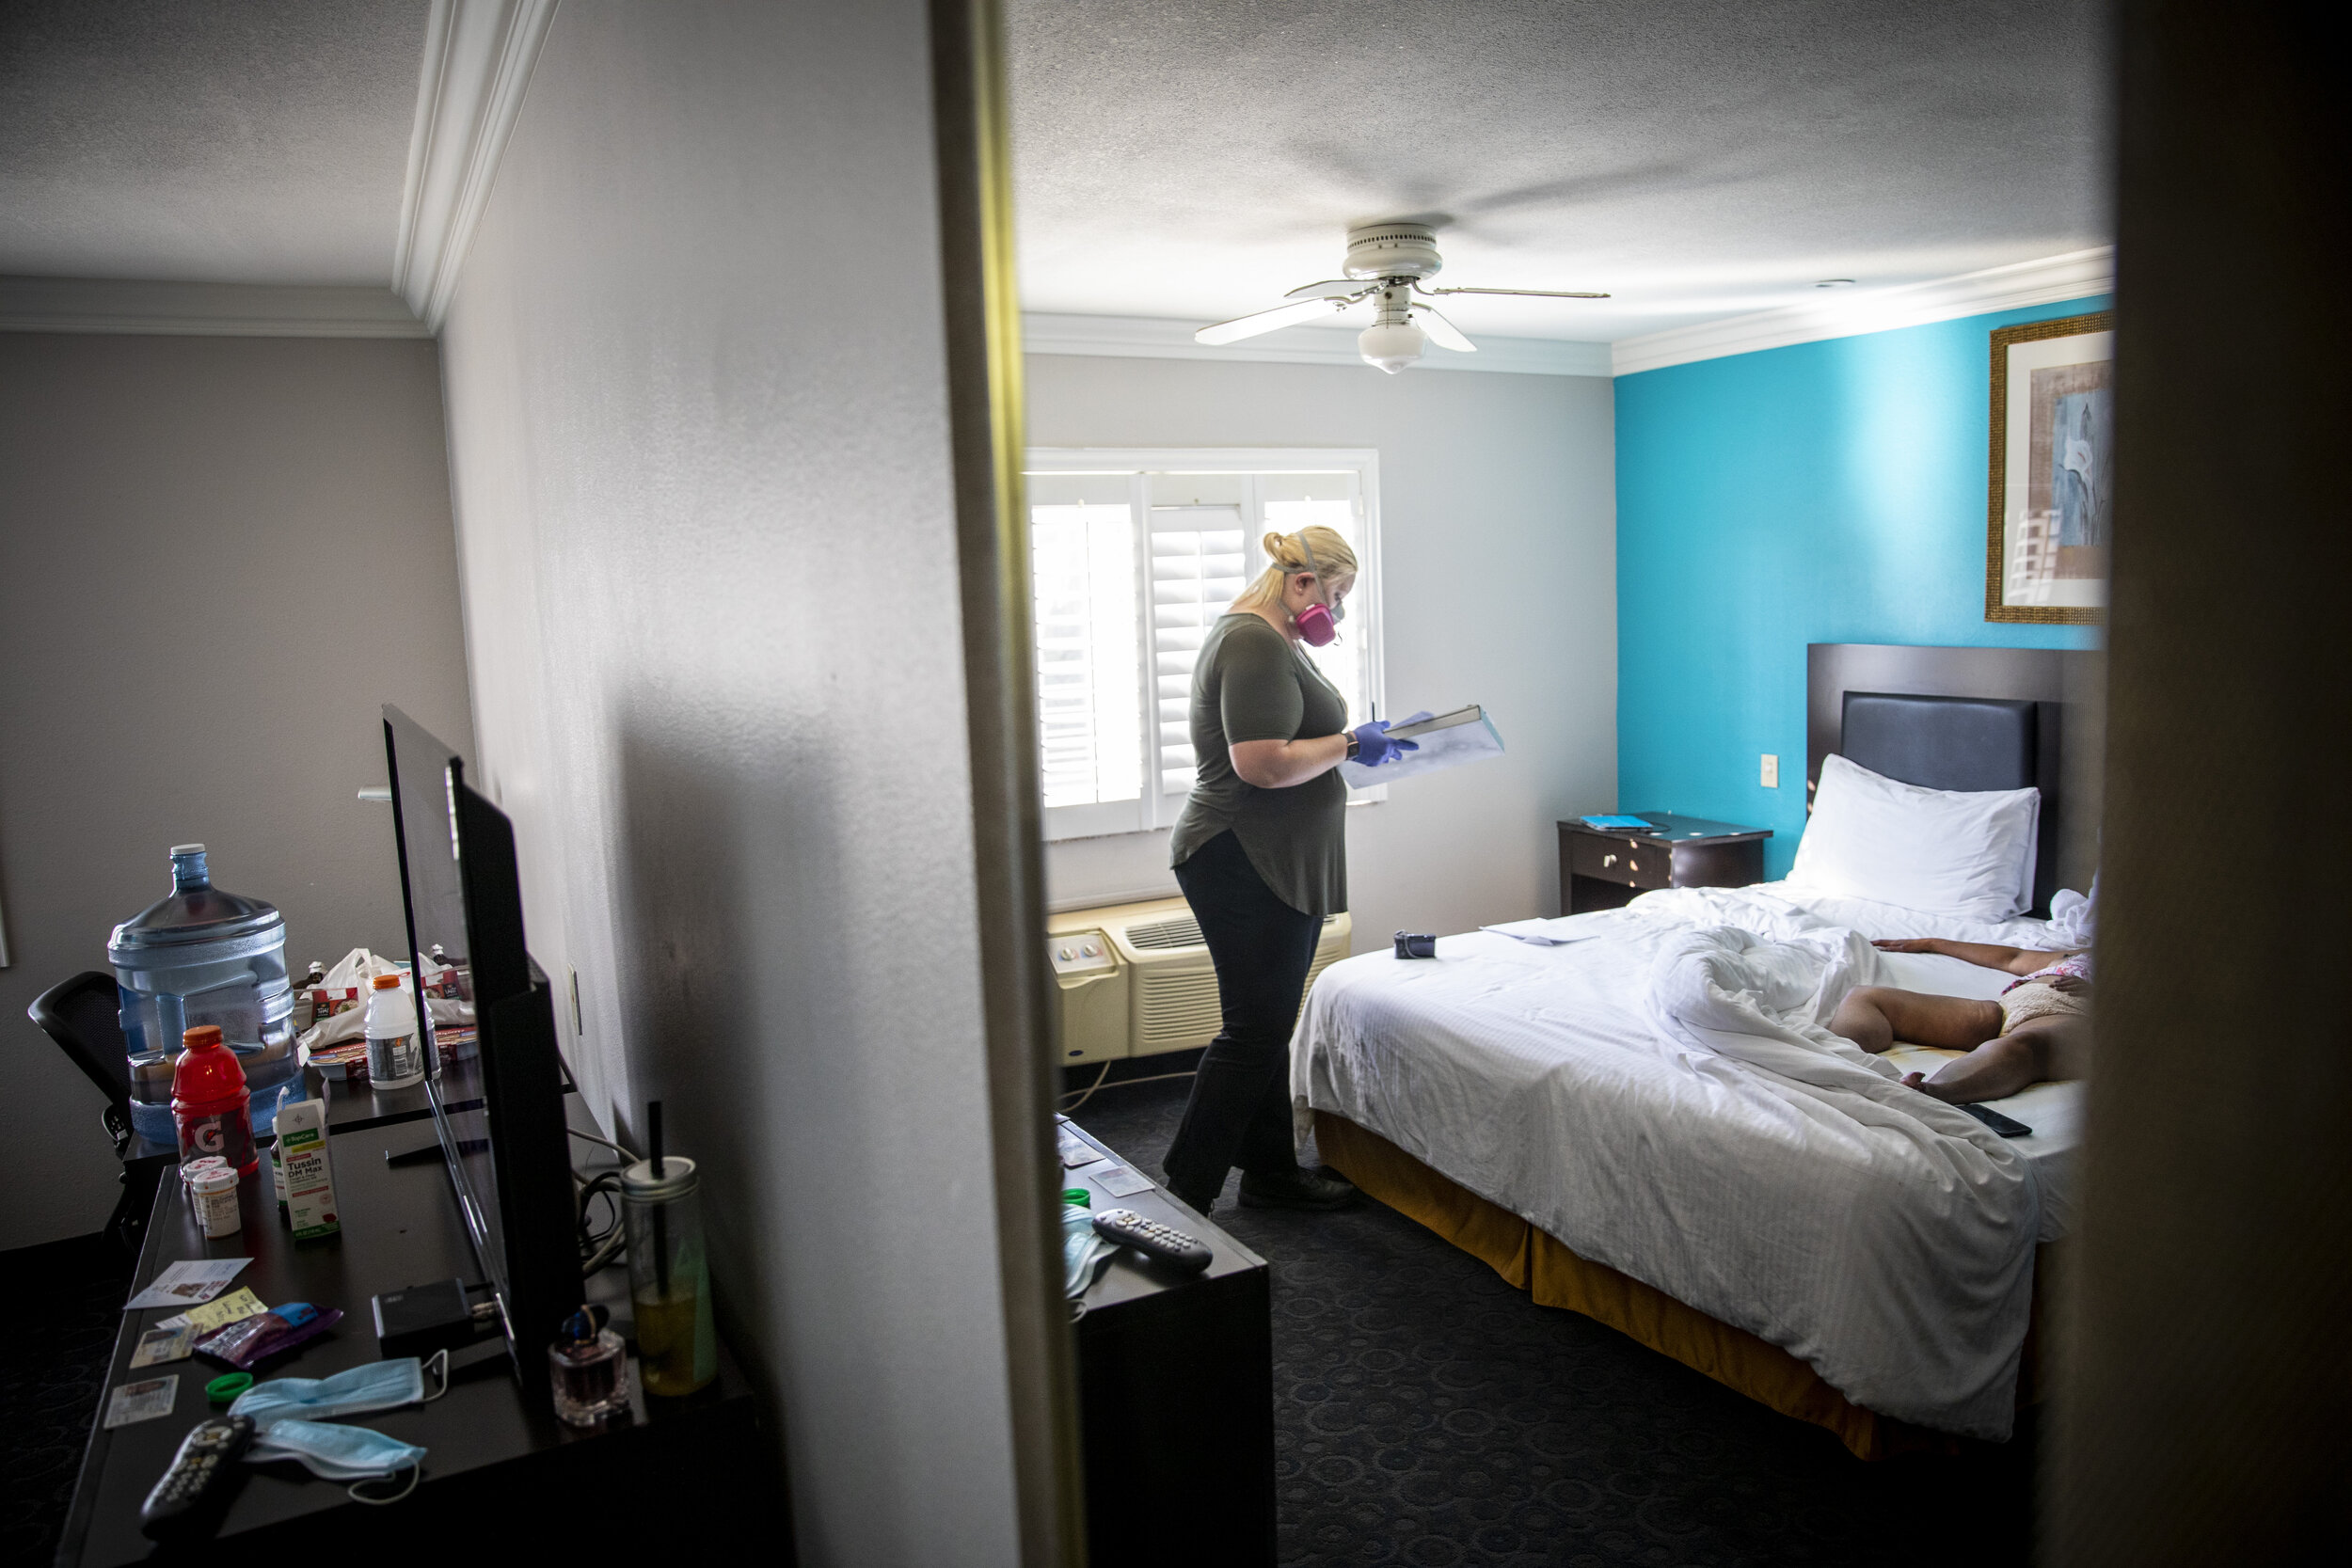  Kristina McGuire, an investigator with the Los Angeles County Dept. of Medical Examiner-Coroner, exams the lifeless body of Judy Bounthong, 58, an ob-gyn tech at Emanate Queen of the Valley Hospital, at the Days Inn by Wyndham, in West Covina, CA, o